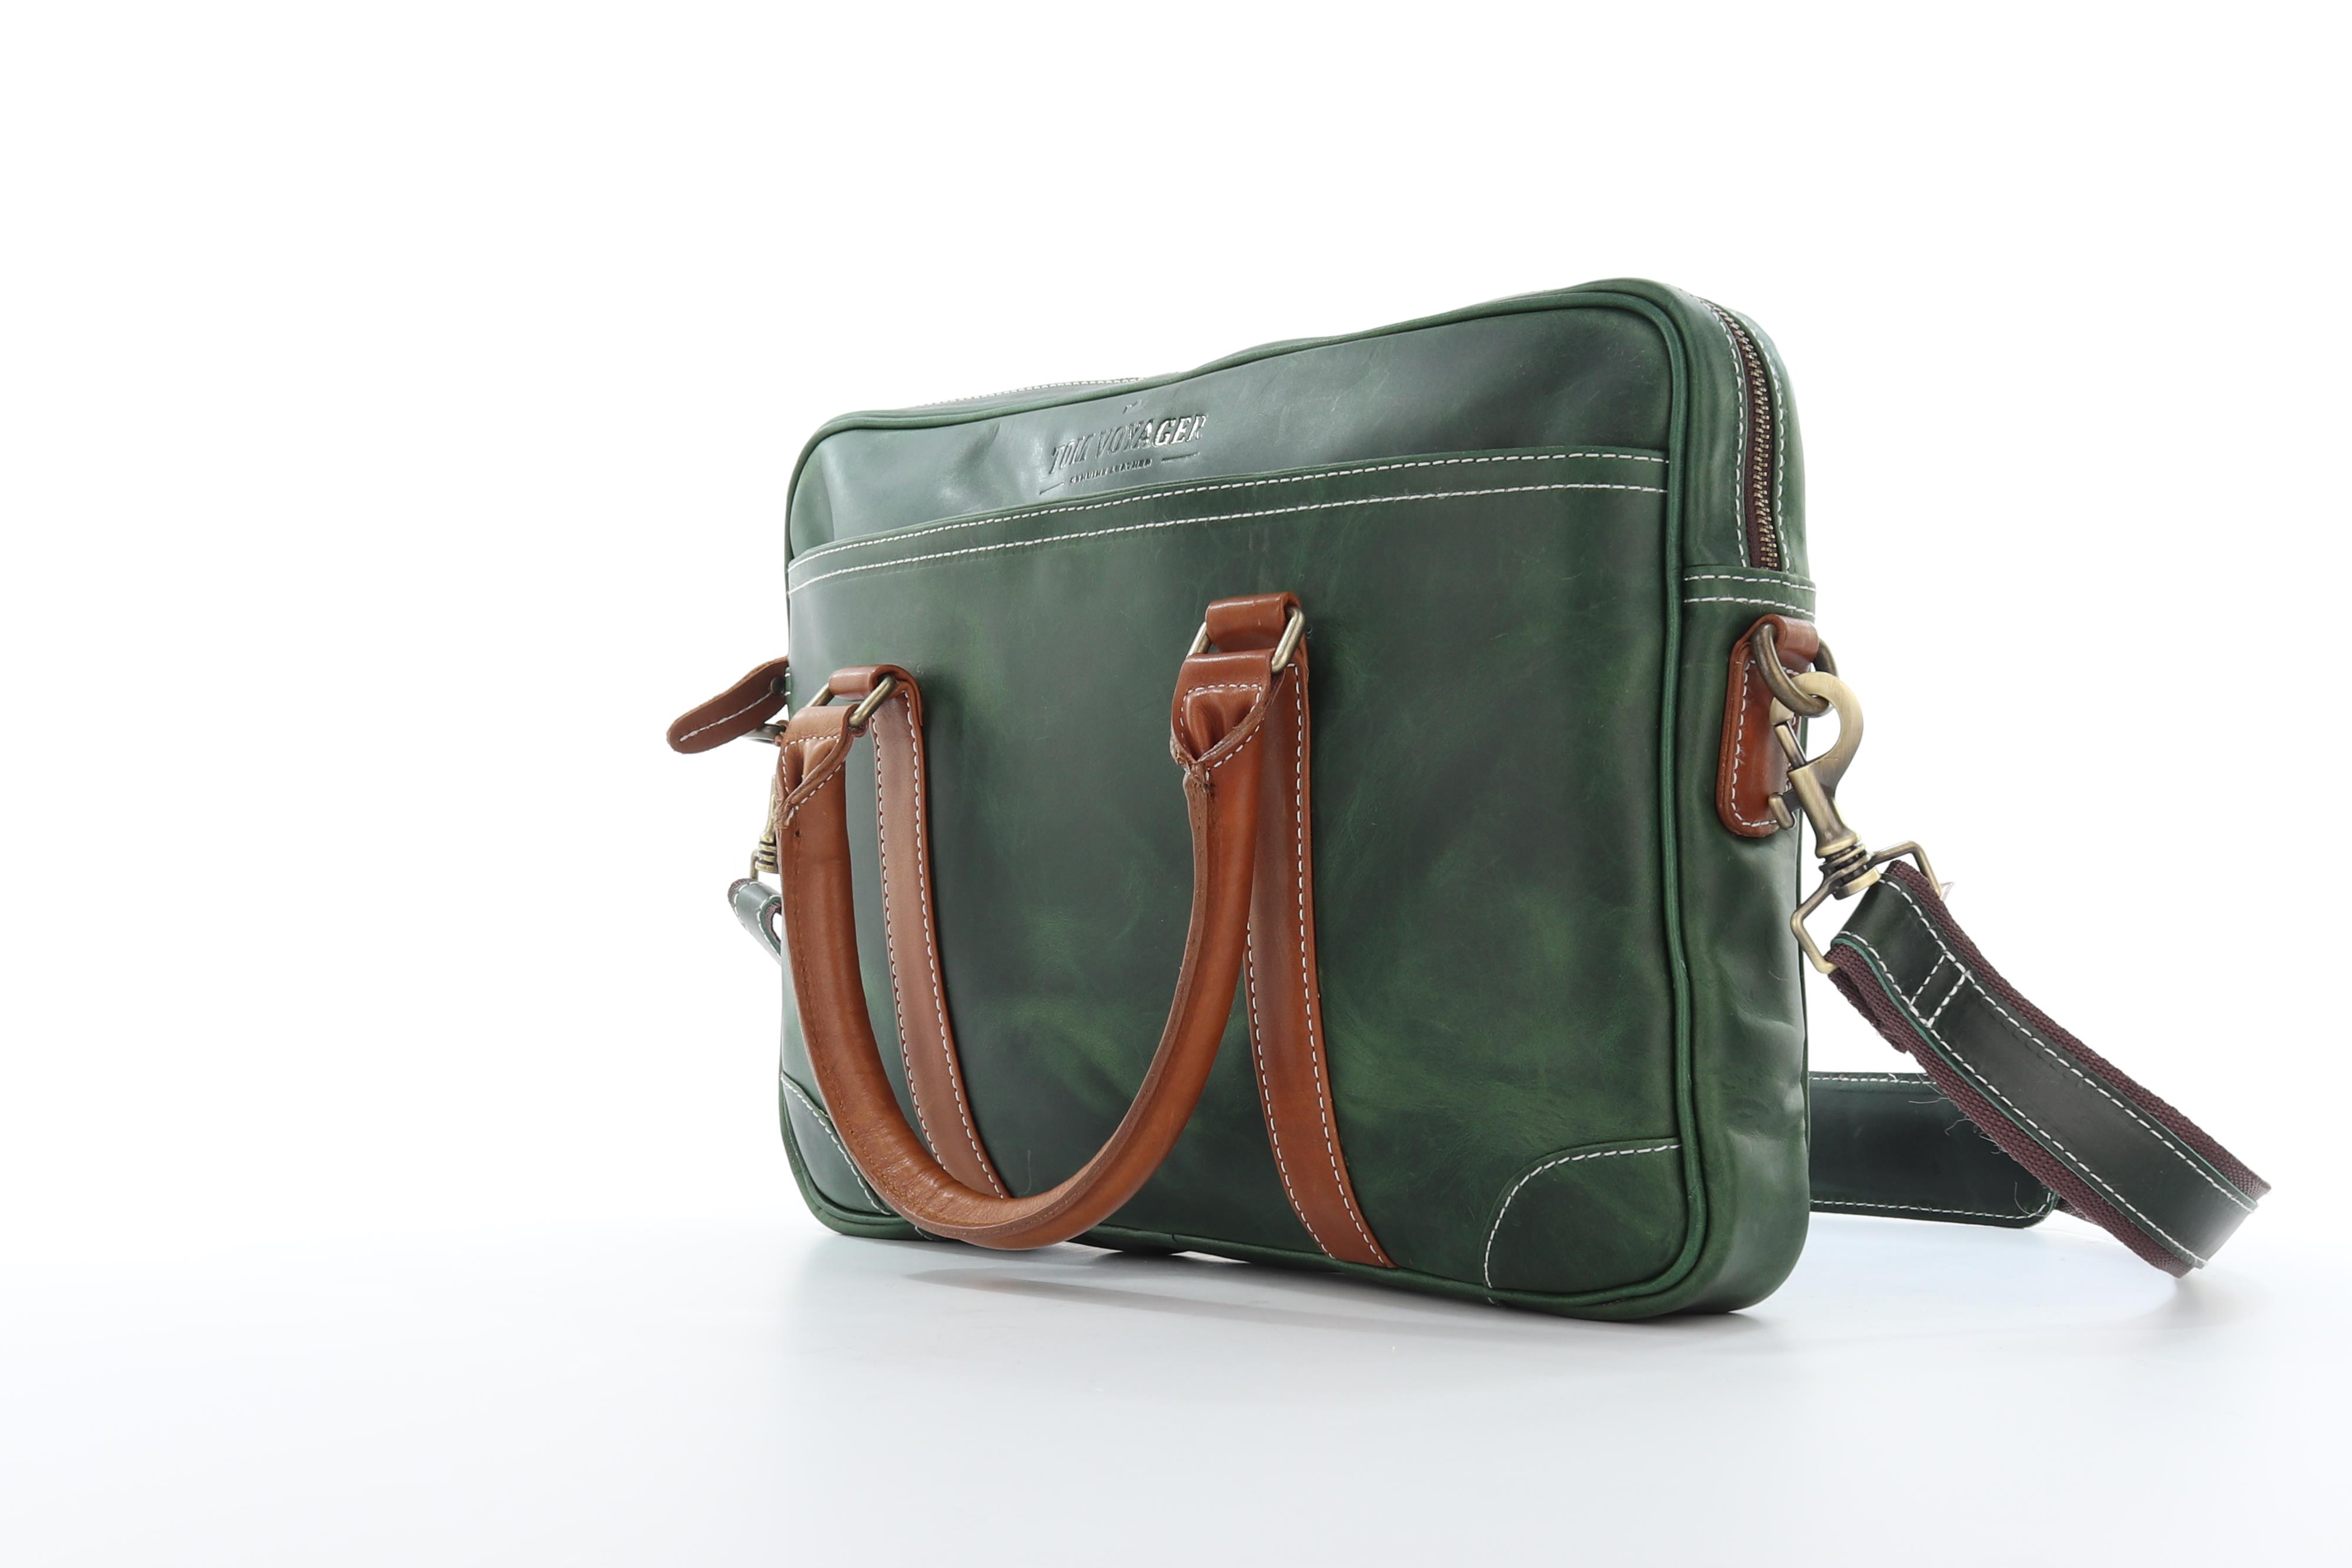 Haden Leather Bag - Laptop Bag - Green - side view